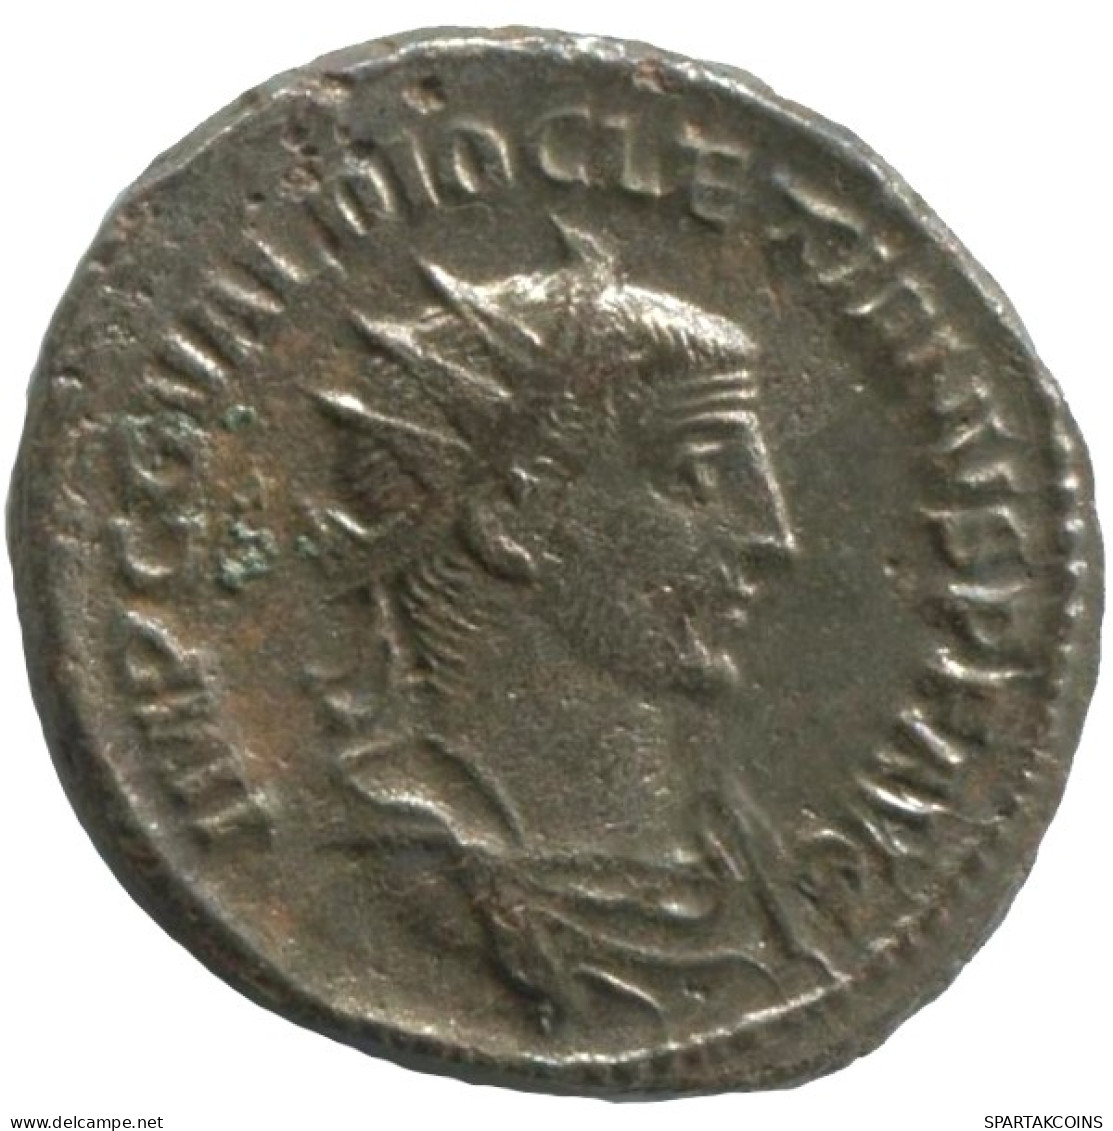 DIOCLETIAN ANTONINIANUS Antioch (?/XXI) AD287 IOVICONSERVATORI. #ANT1917.48.E.A - The Tetrarchy (284 AD To 307 AD)